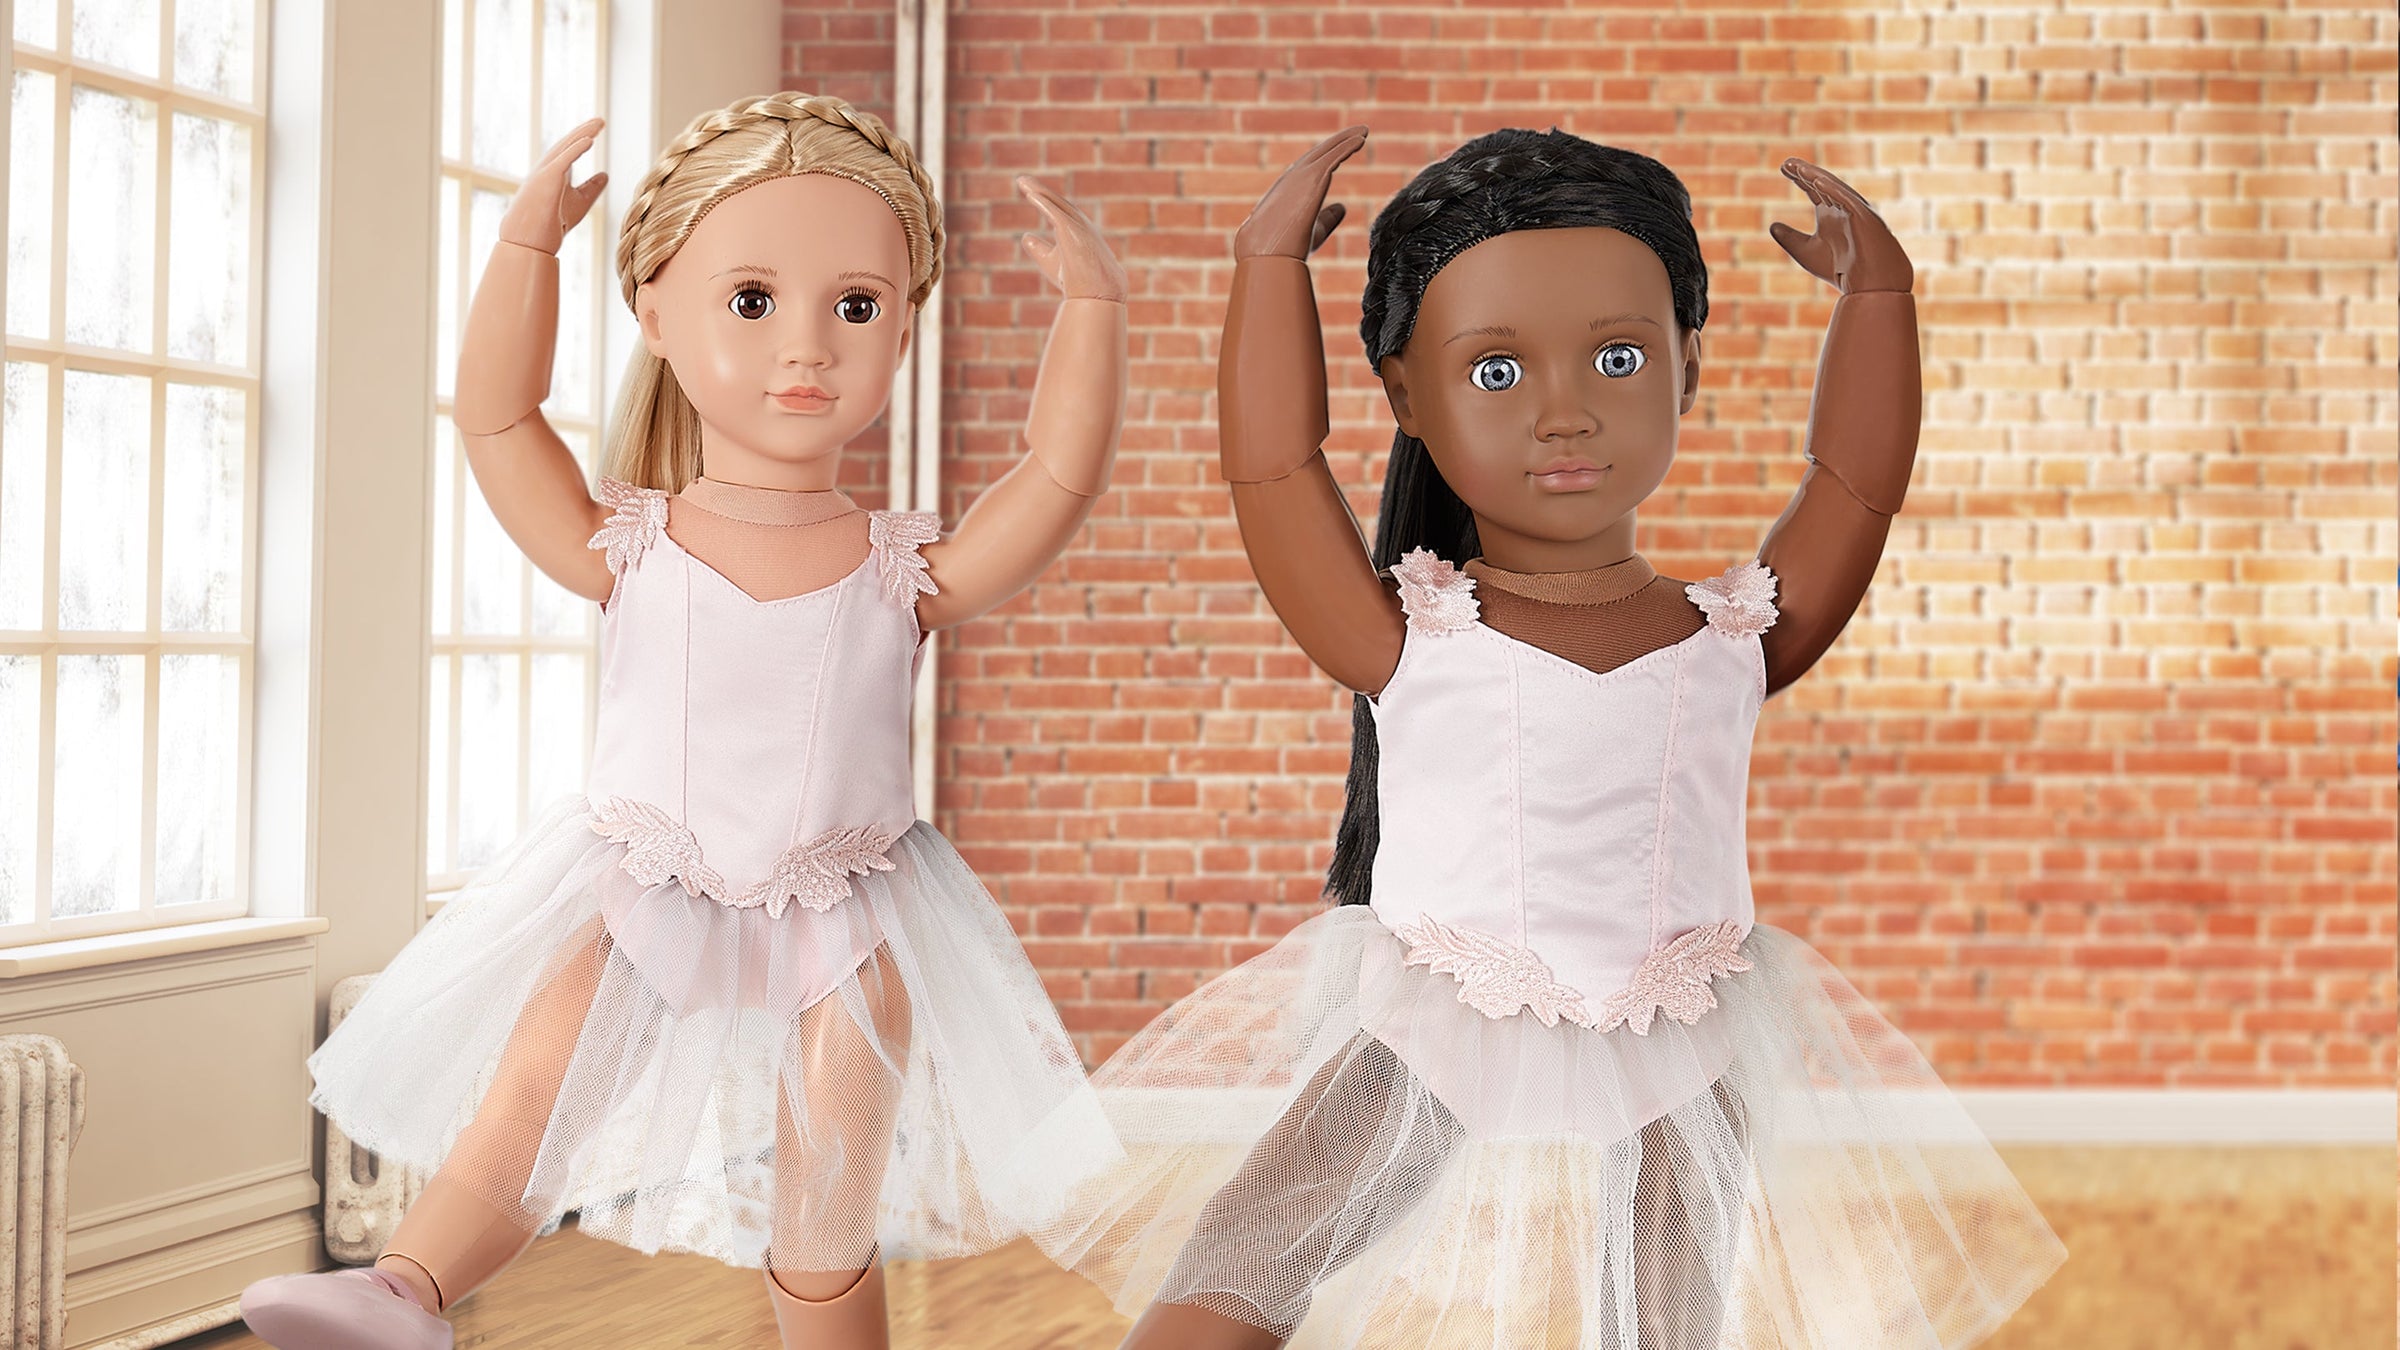 Two 18 Inch Dolls Practicing Ballet Dancing